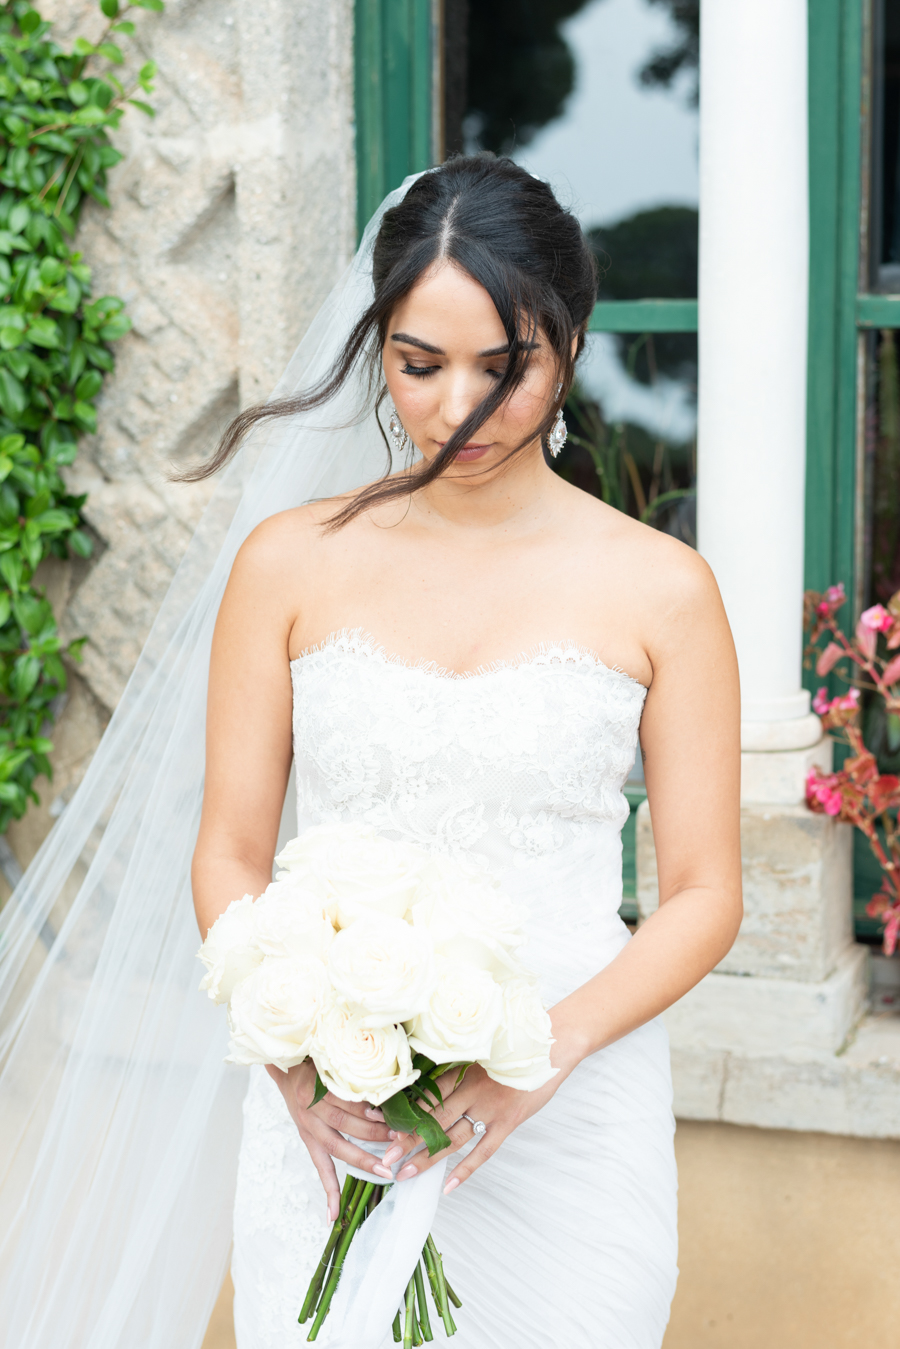 Ravello Elopement at Villa Cimbrone - The Elopement Experience